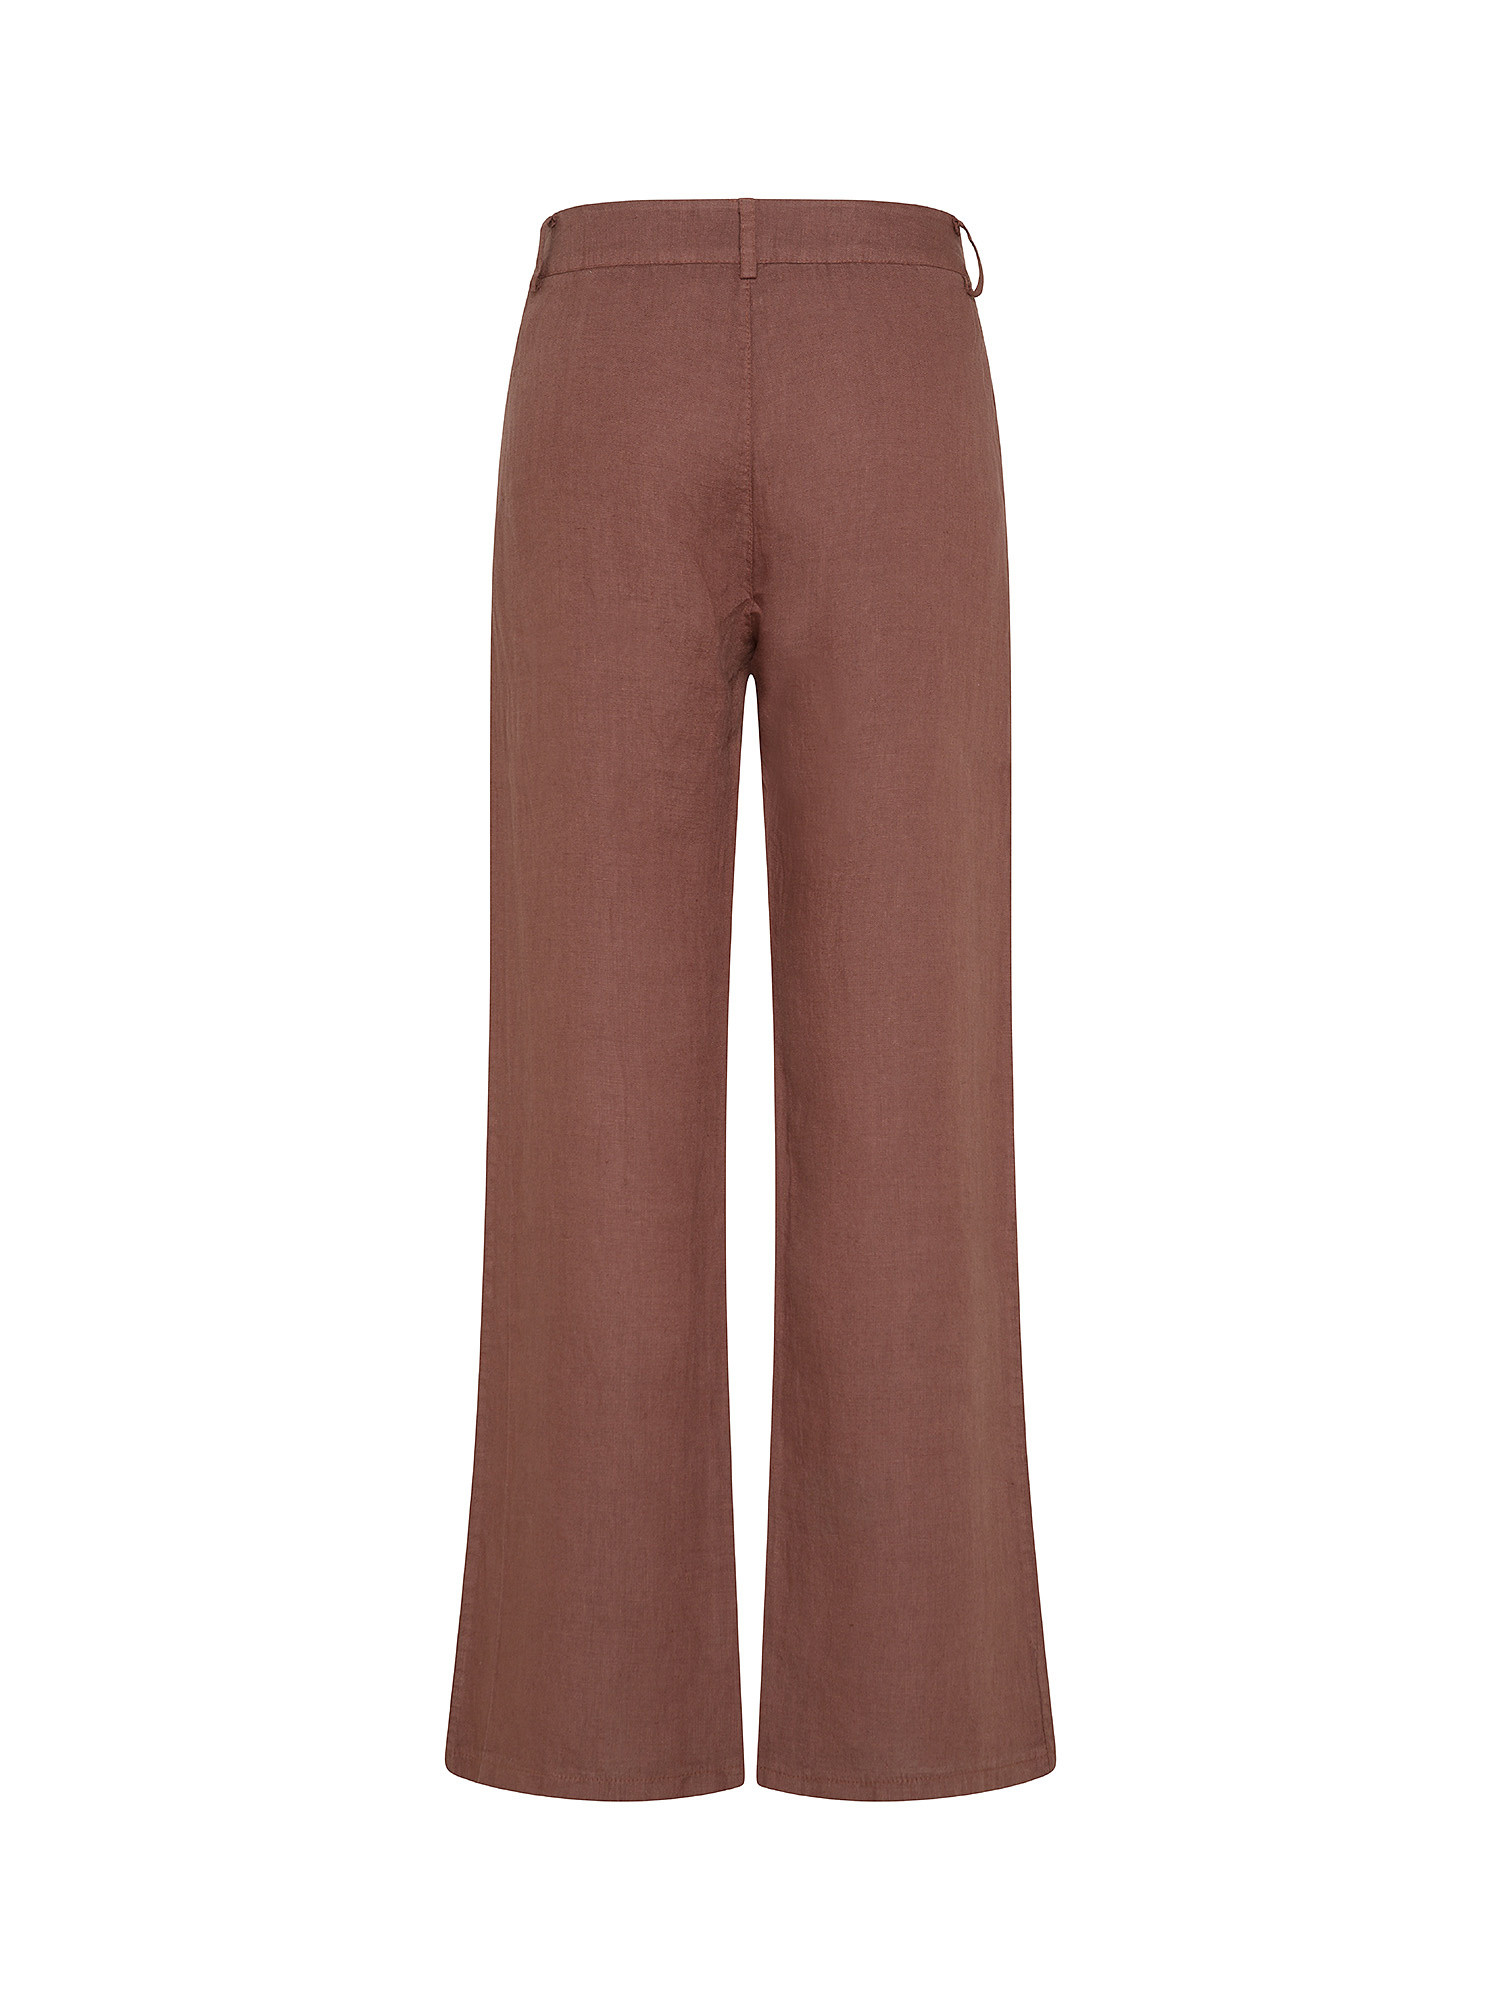 Koan - Linen trousers with pleats, Brown, large image number 1